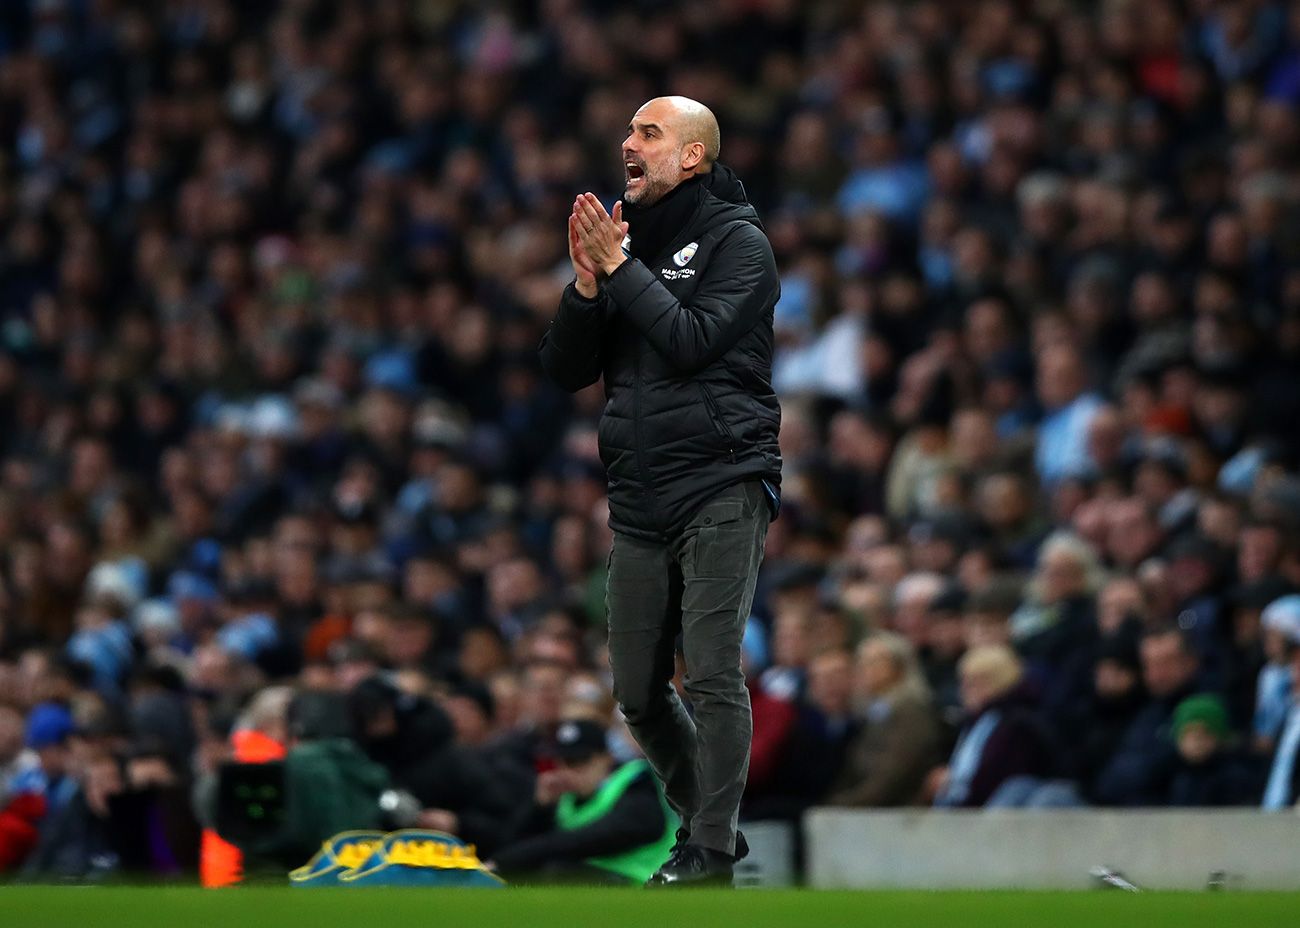 Pep Guardiola encourages to his players in a party